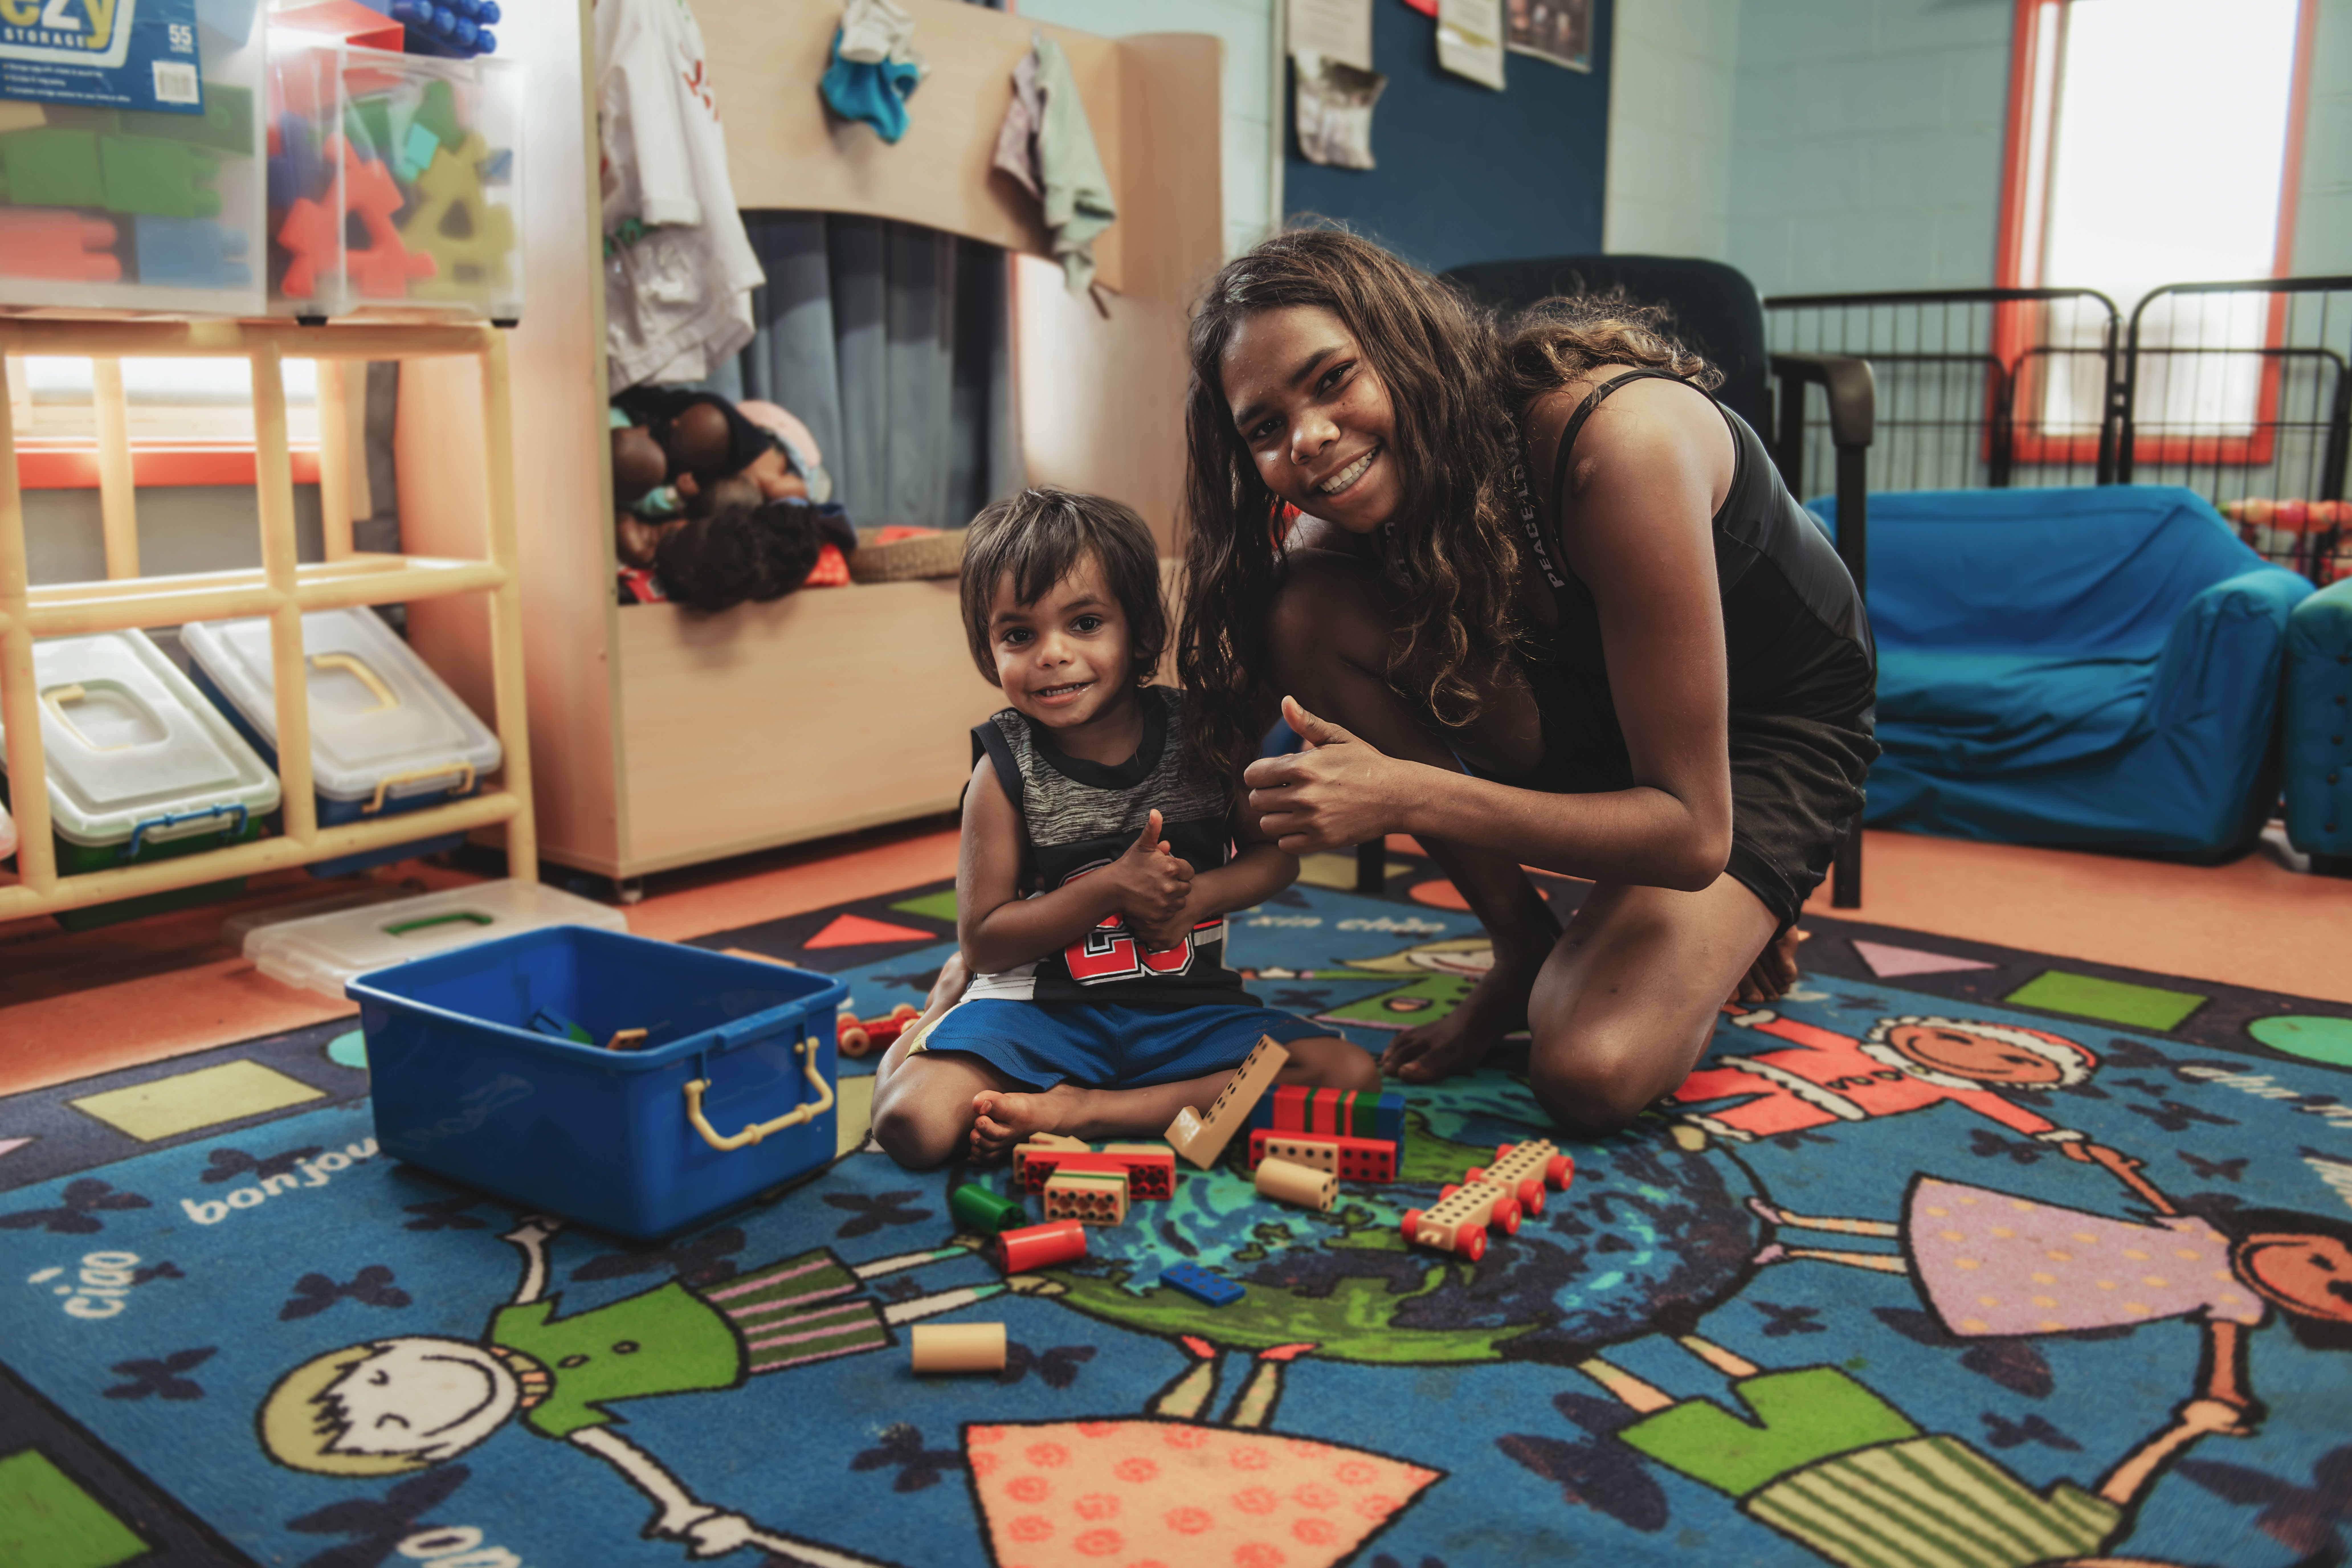 Photo of girl and younger boy playing with toys, smiling at the camera with their thumbs up